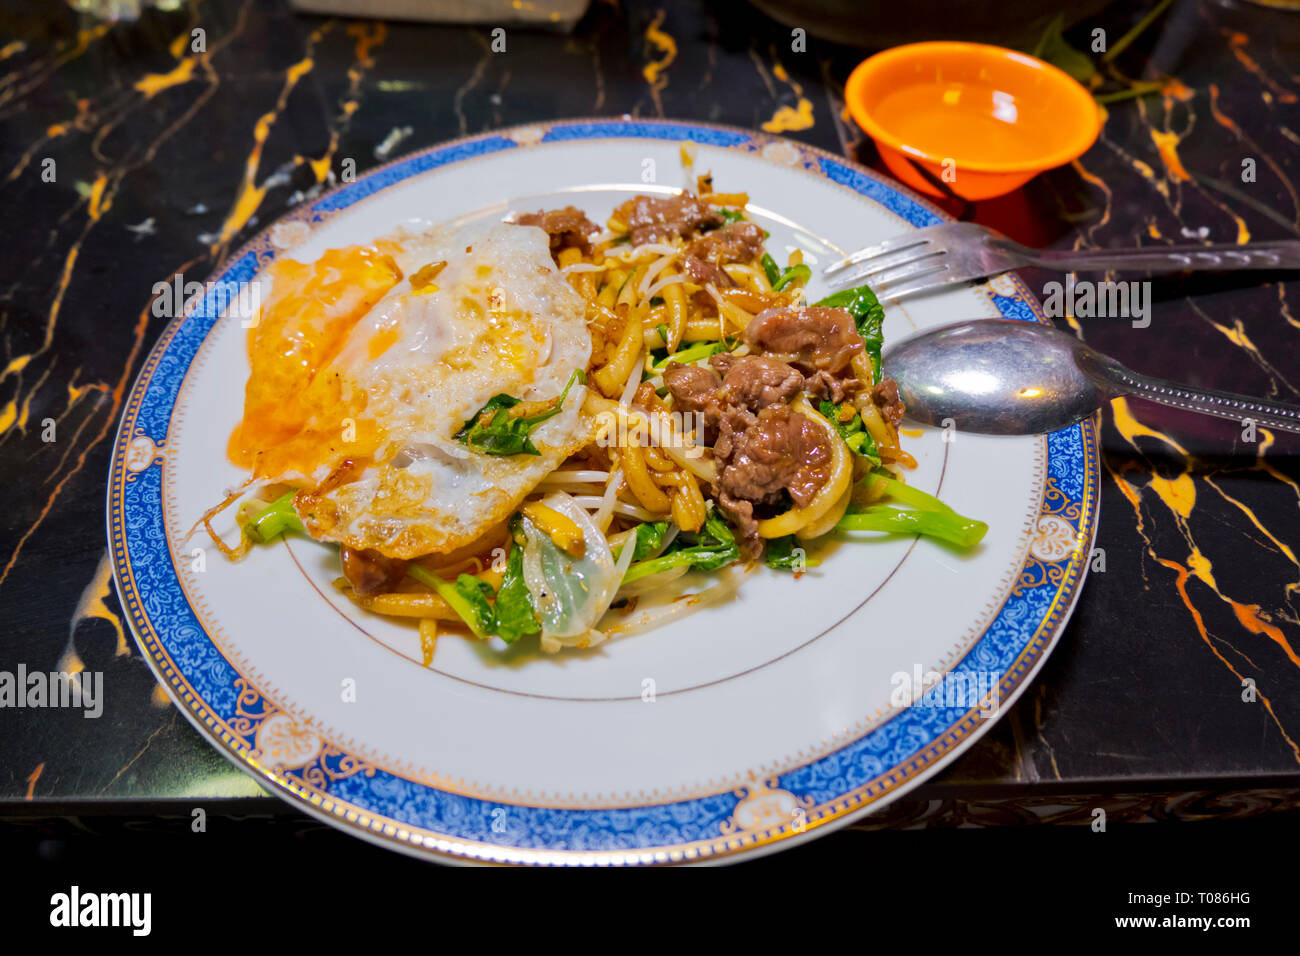 Noodle dish with beef and egg, Russian Market, Phnom Penh, Cambodia, Asia Stock Photo